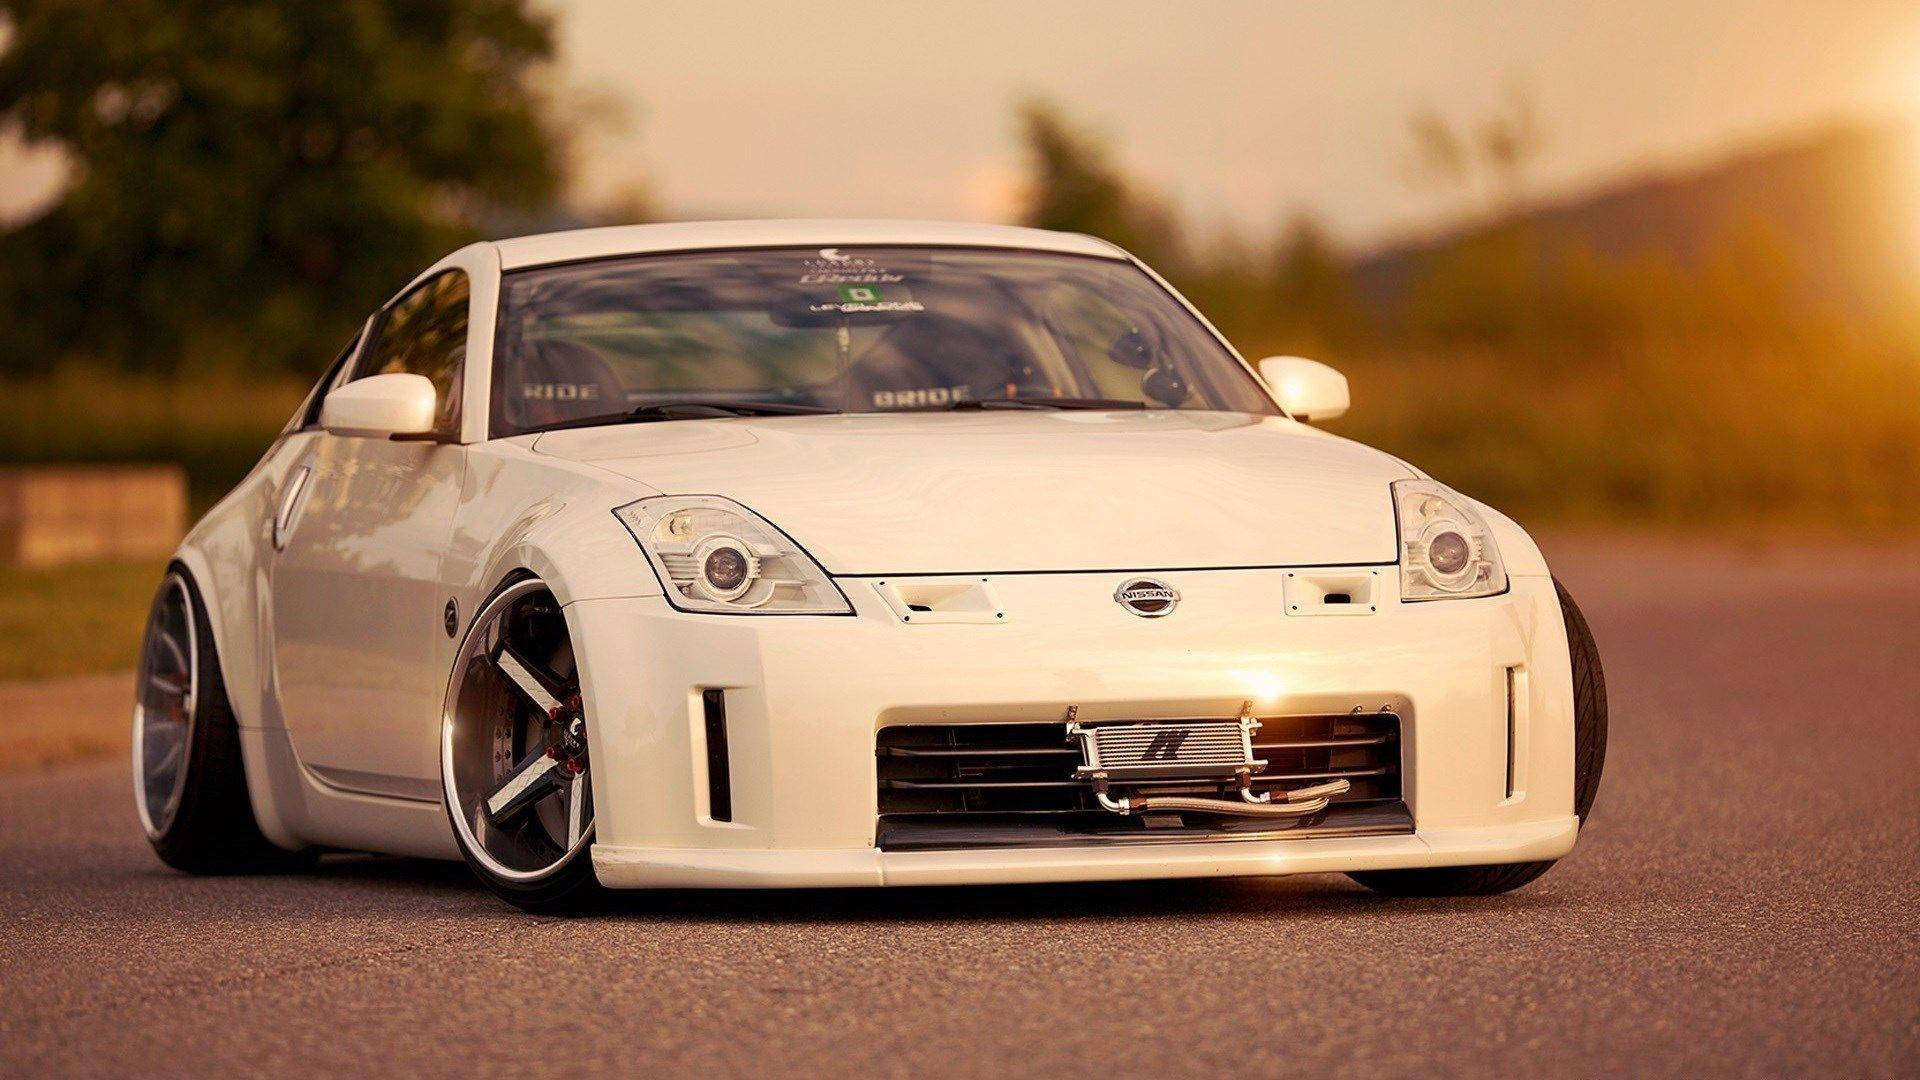 Get inspired by the Nissan 350Z Wallpaper